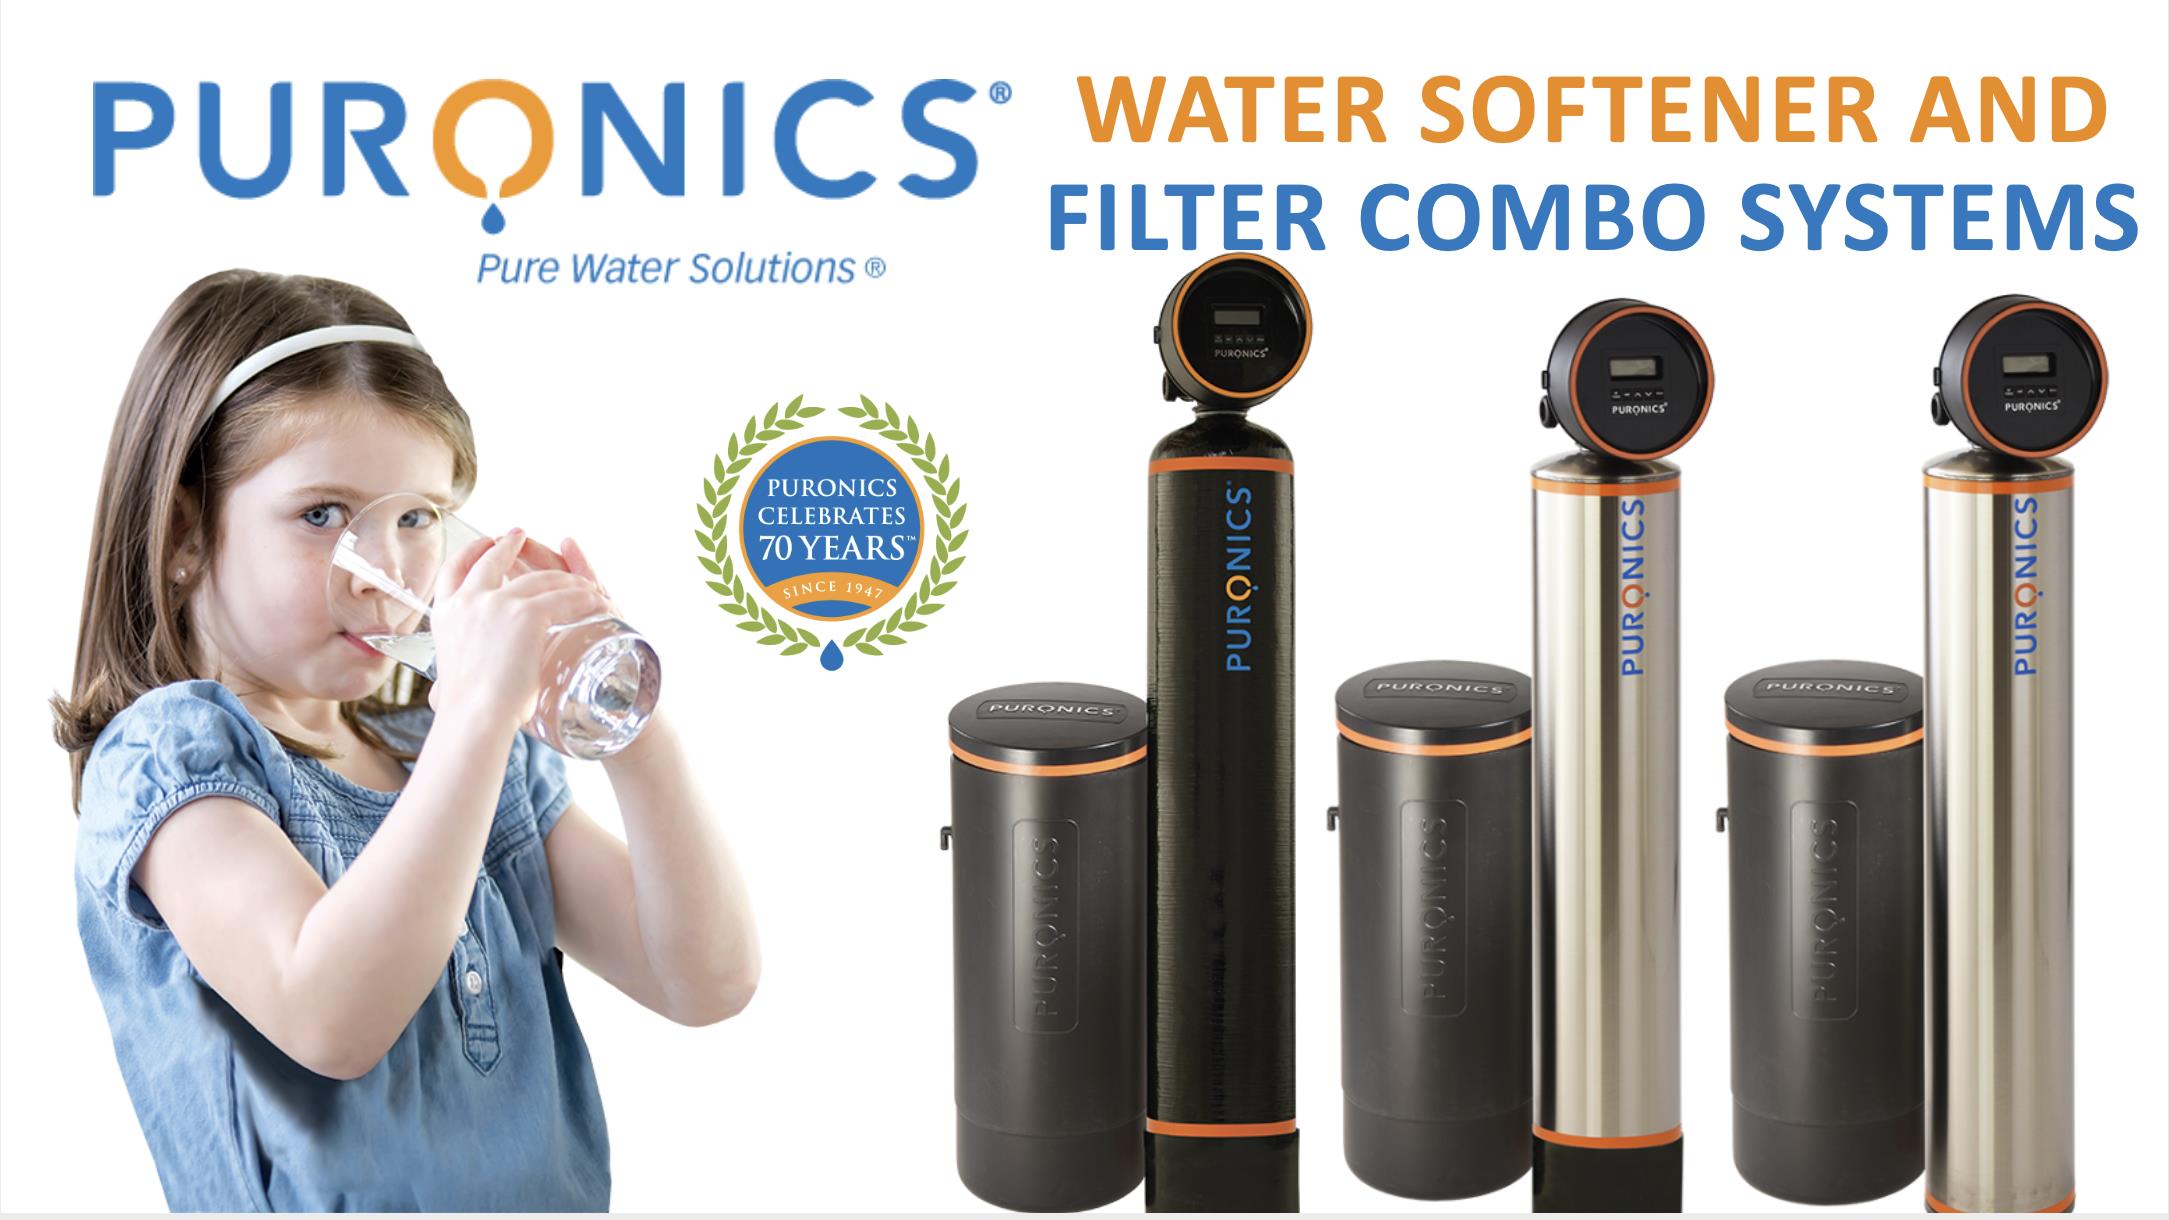 Pierce Water Solutions/Water Purification                                                                                                                                                                                      